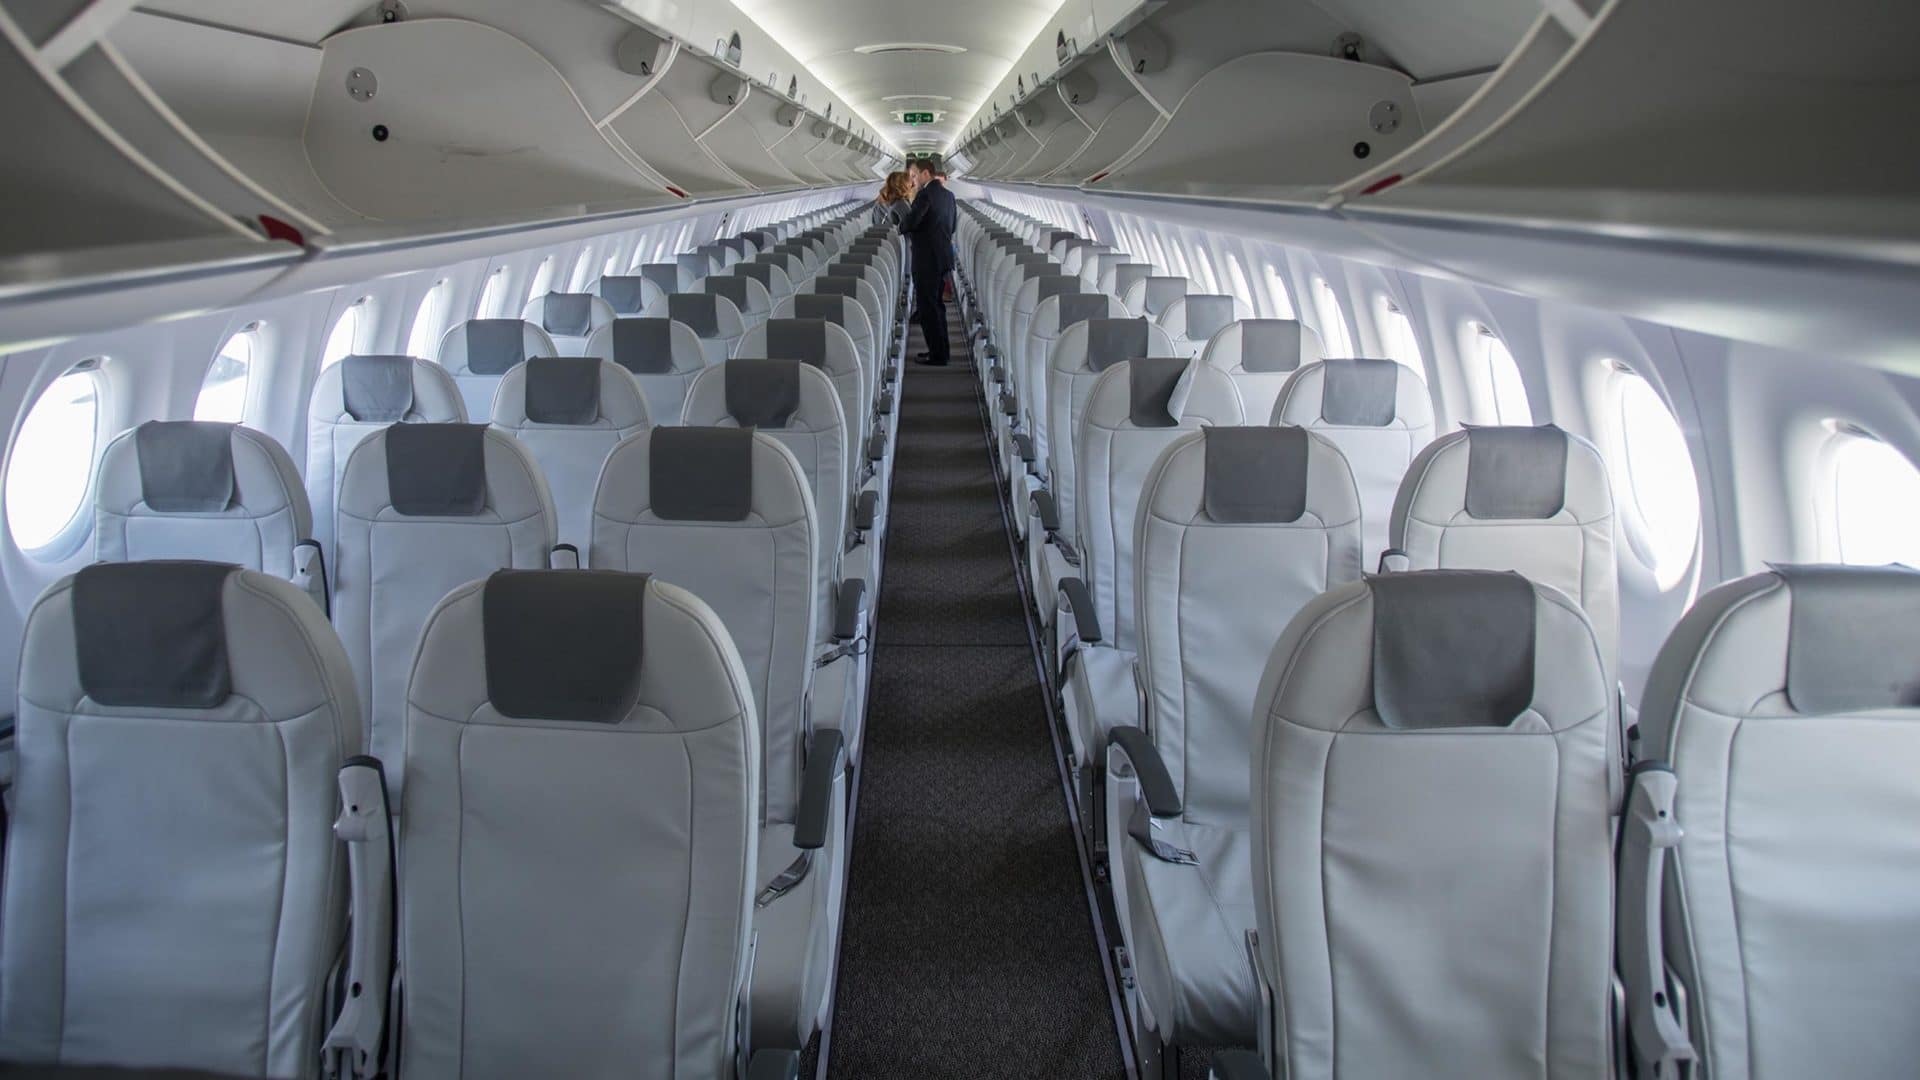 I'm too big to fit down the aisle of planes - it's discrimination